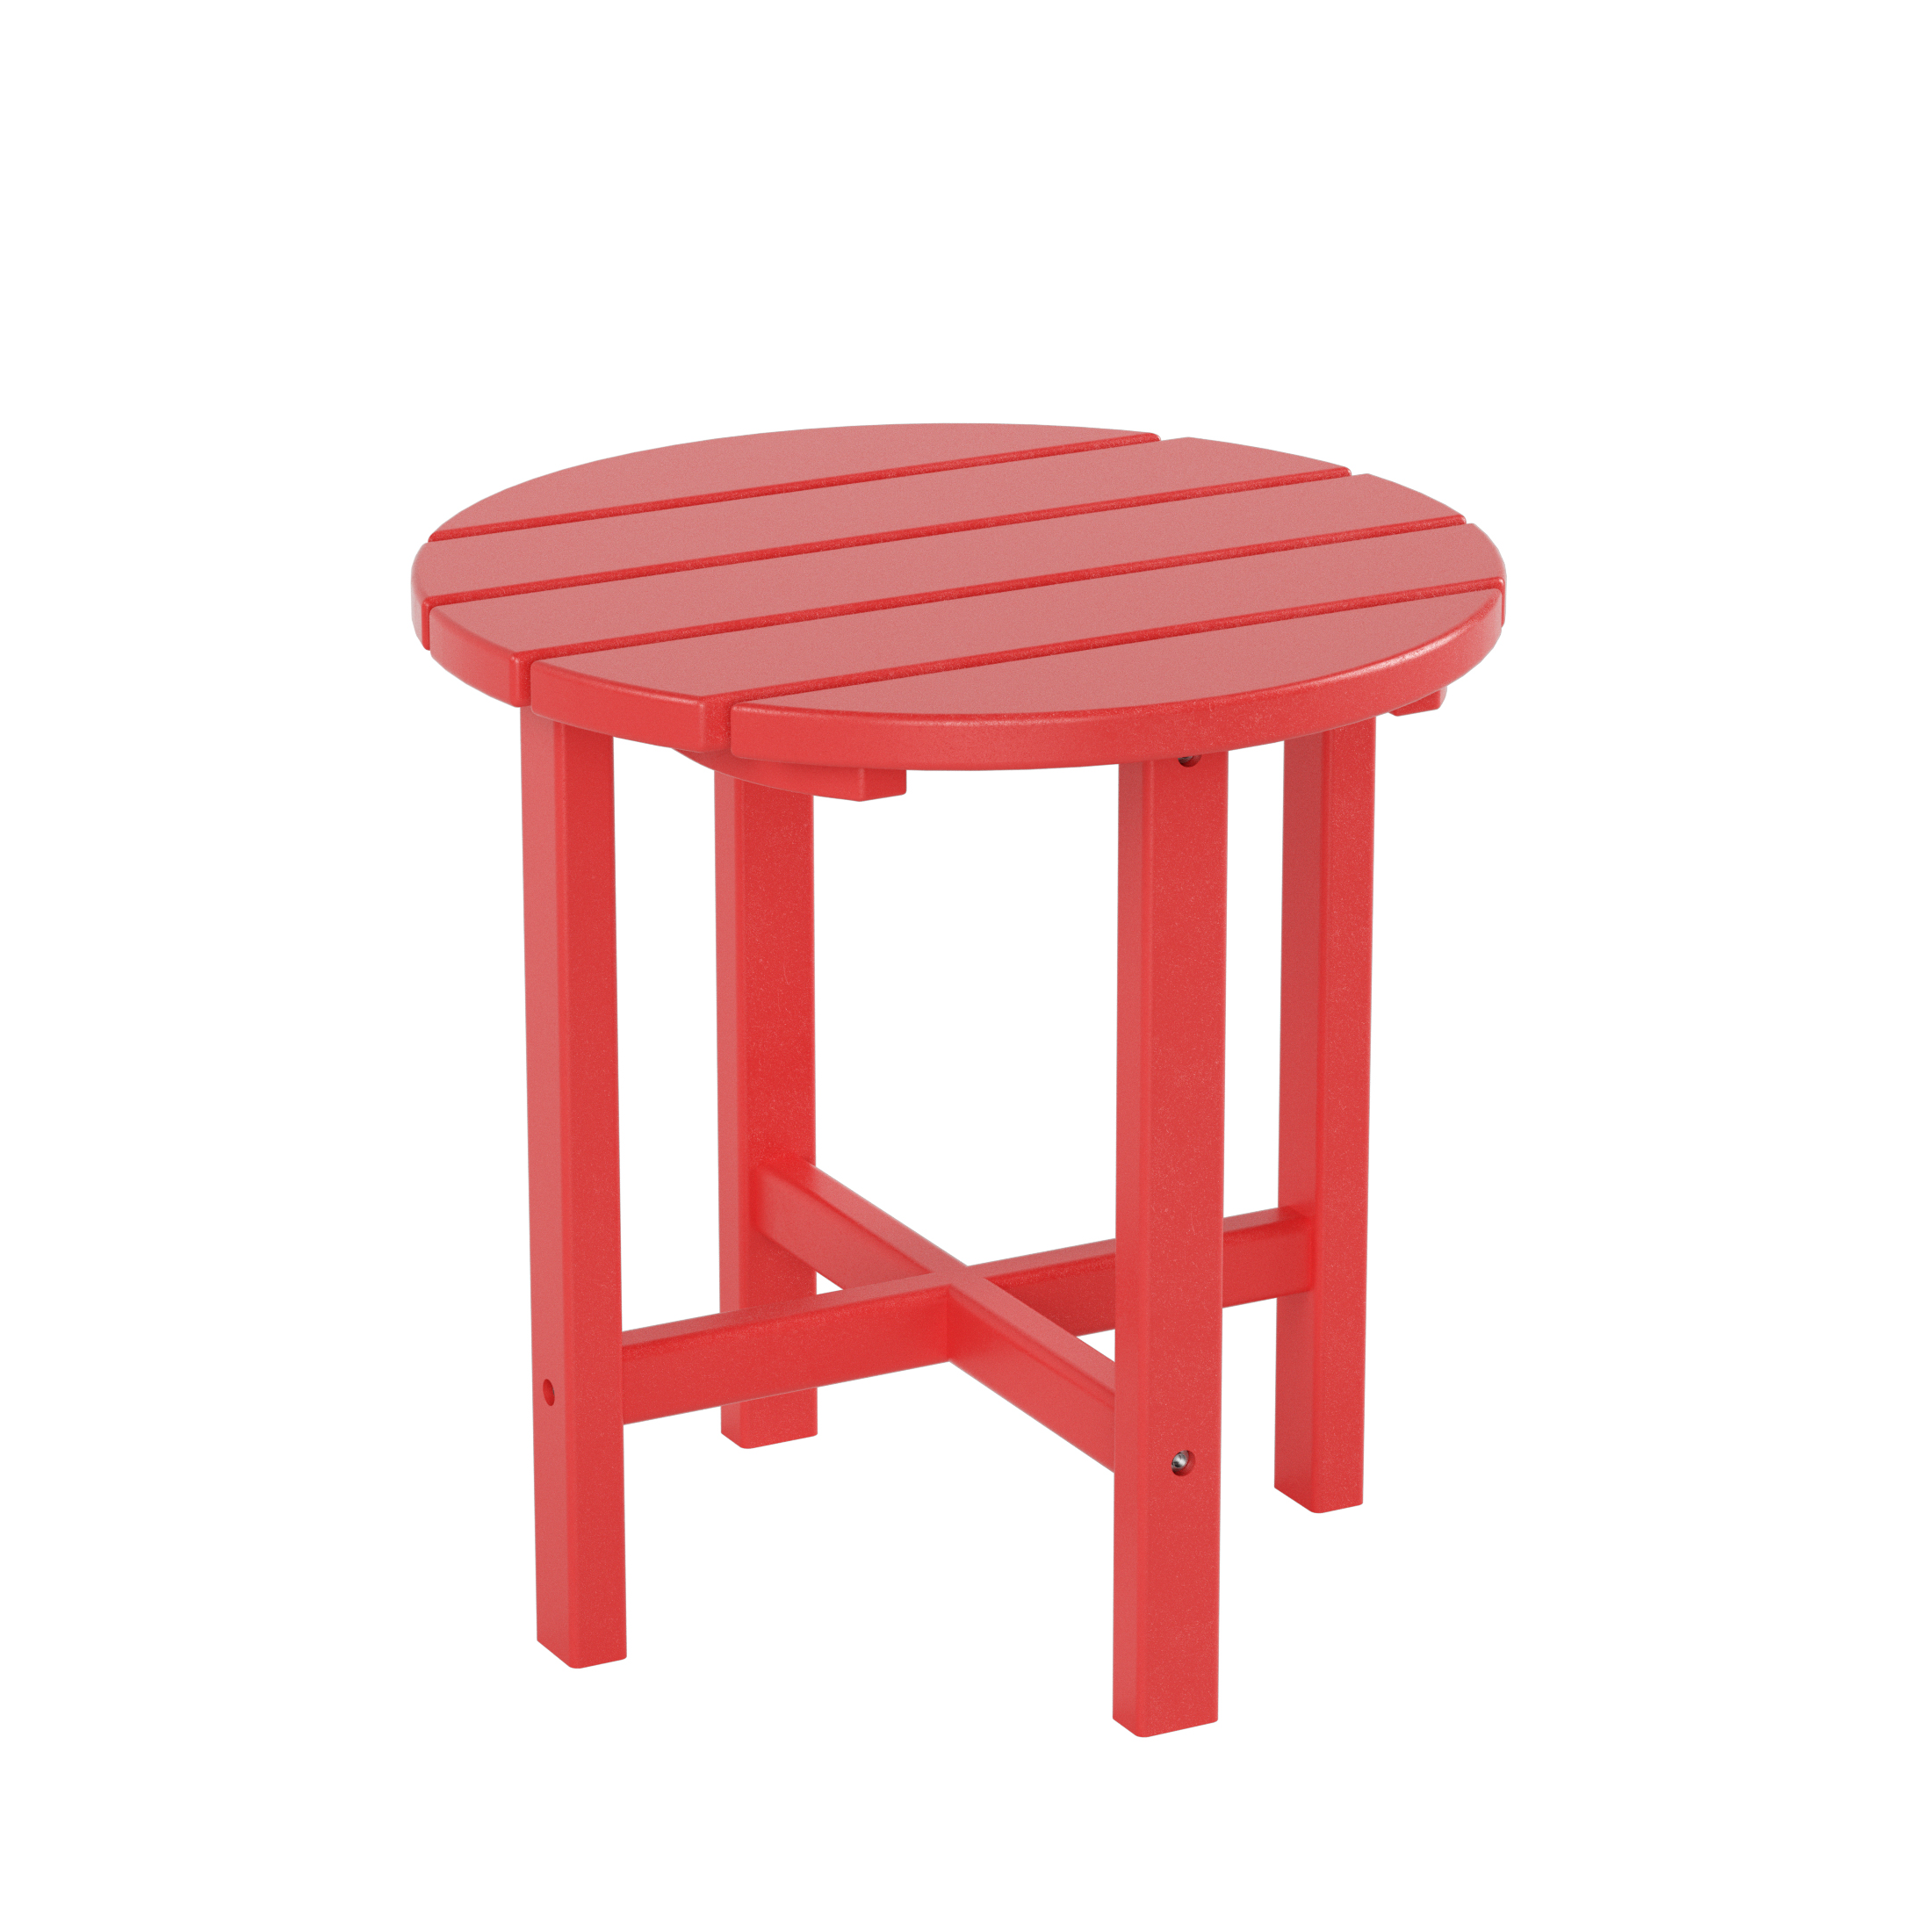 GARDEN 2-Piece Set Classic Plastic Porch Rocking Chair with Round Side Table Included, Red - image 3 of 7